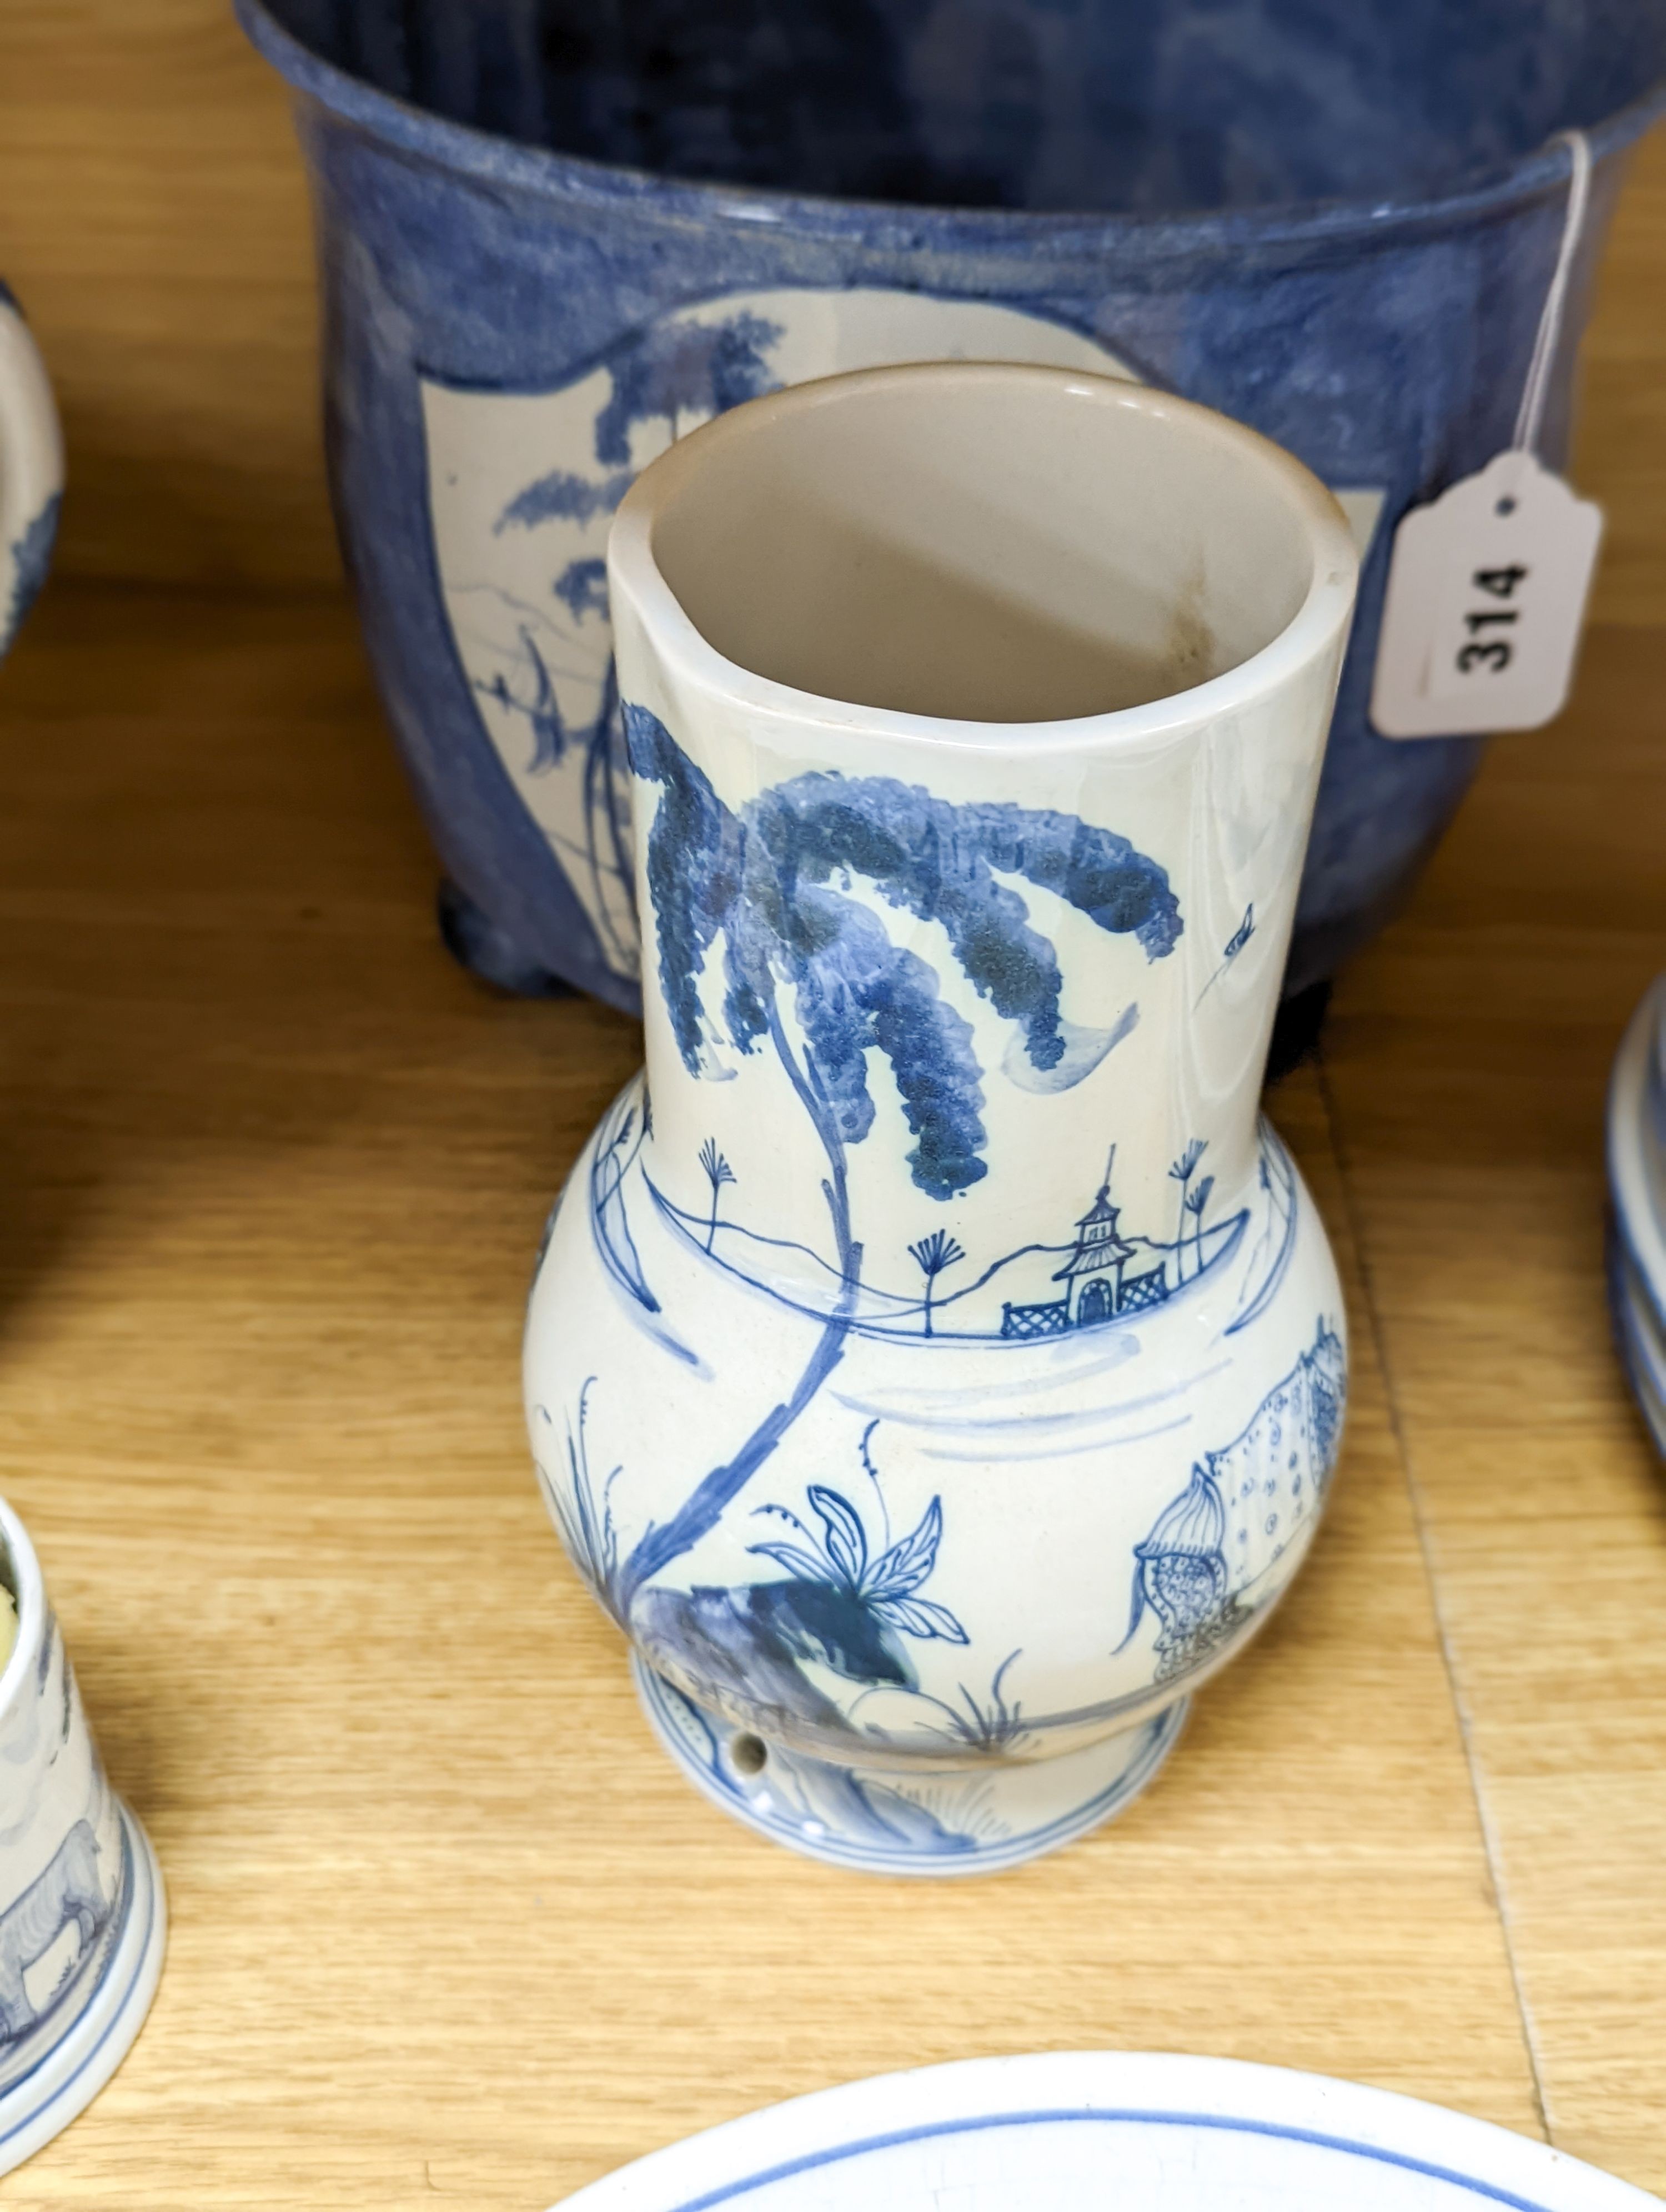 Isis pottery for Colefax and Fowler, a group of blue and white ceramics decorated in imitation of Bristol delftwares